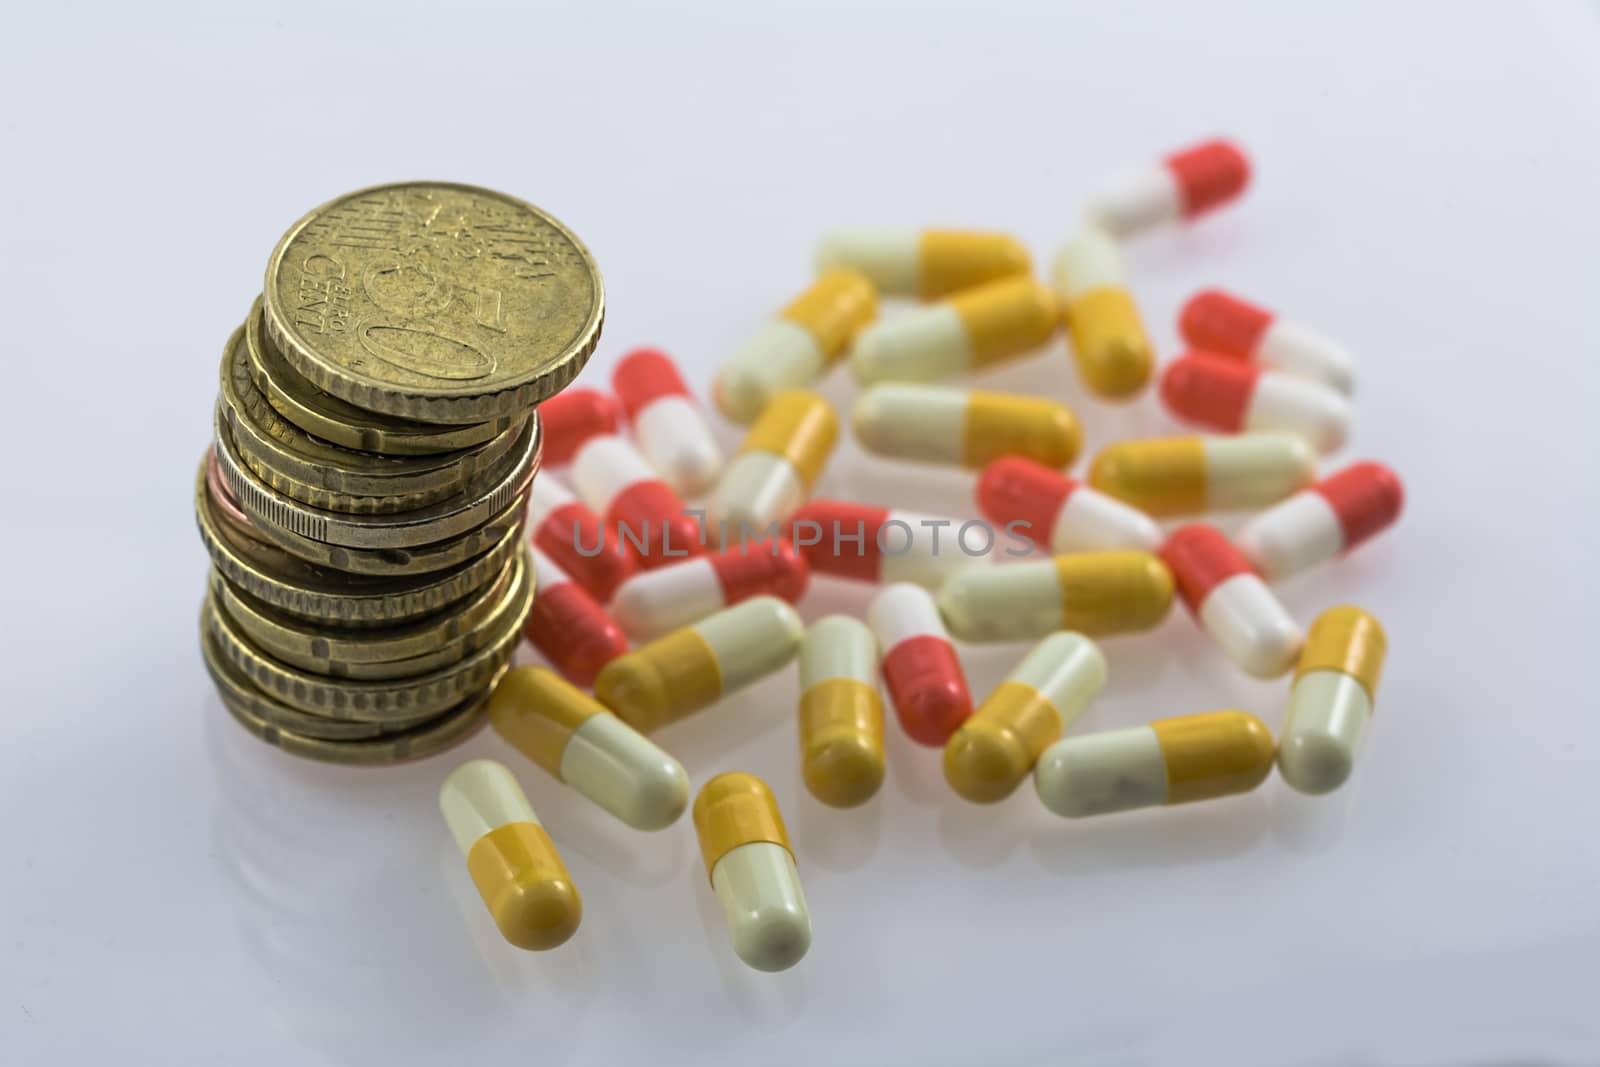 Concept of sanitary copayment, money and medicines by digicomphoto